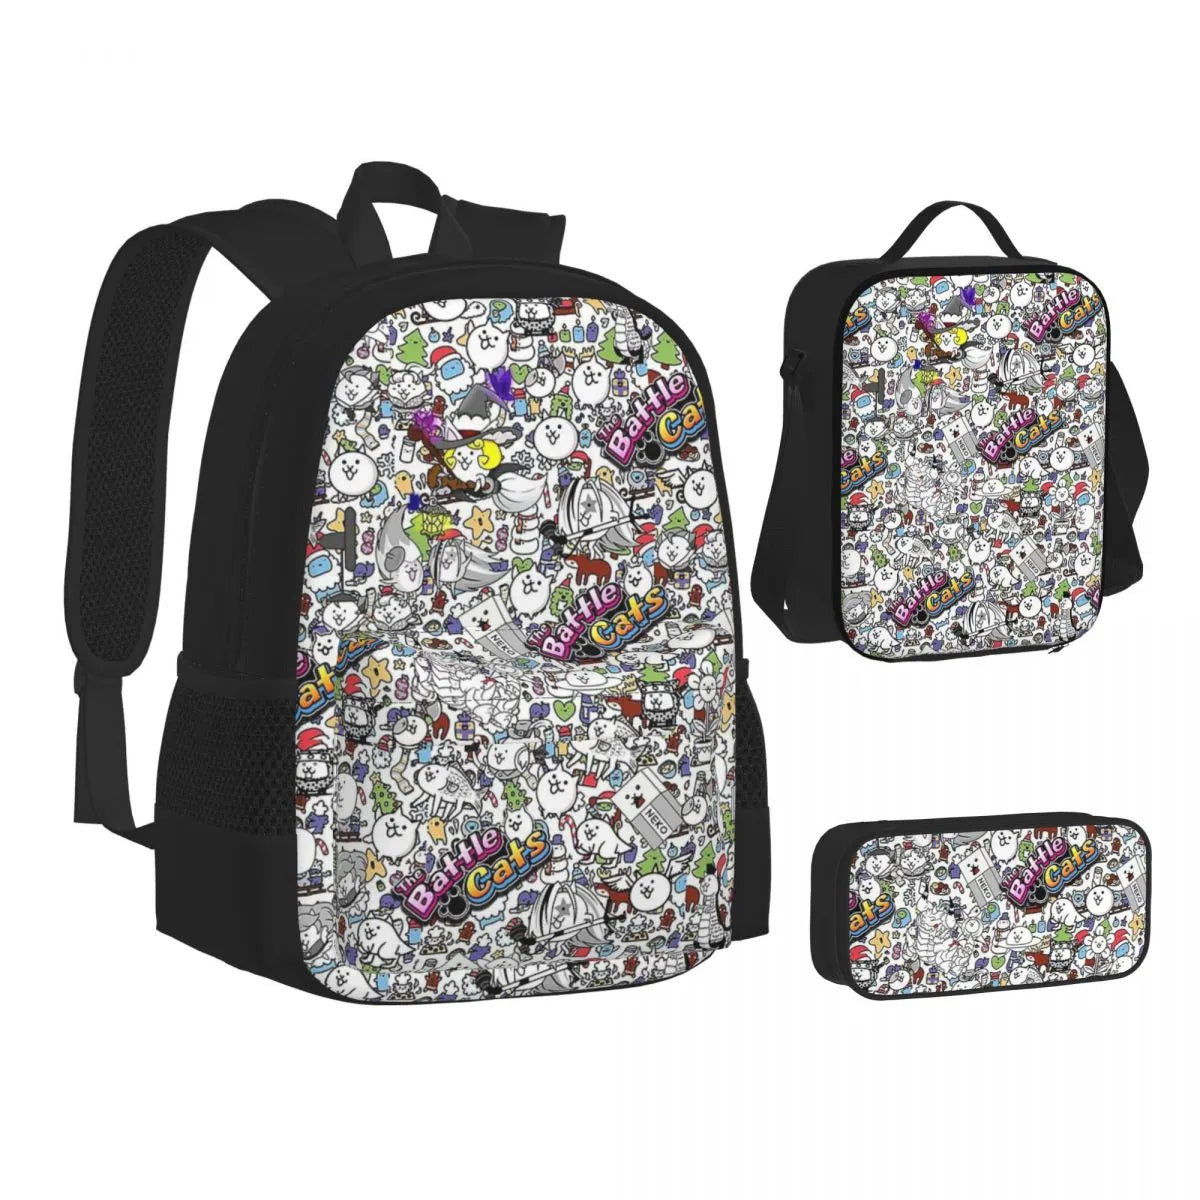 Adventure Awaits with Cat Battle Children's School Bags Pencil case and lunch bag 3 in 1 - Let the Fun Begin! - Nekoby Adventure Awaits with Cat Battle Children's School Bags Pencil case and lunch bag 3 in 1 - Let the Fun Begin!